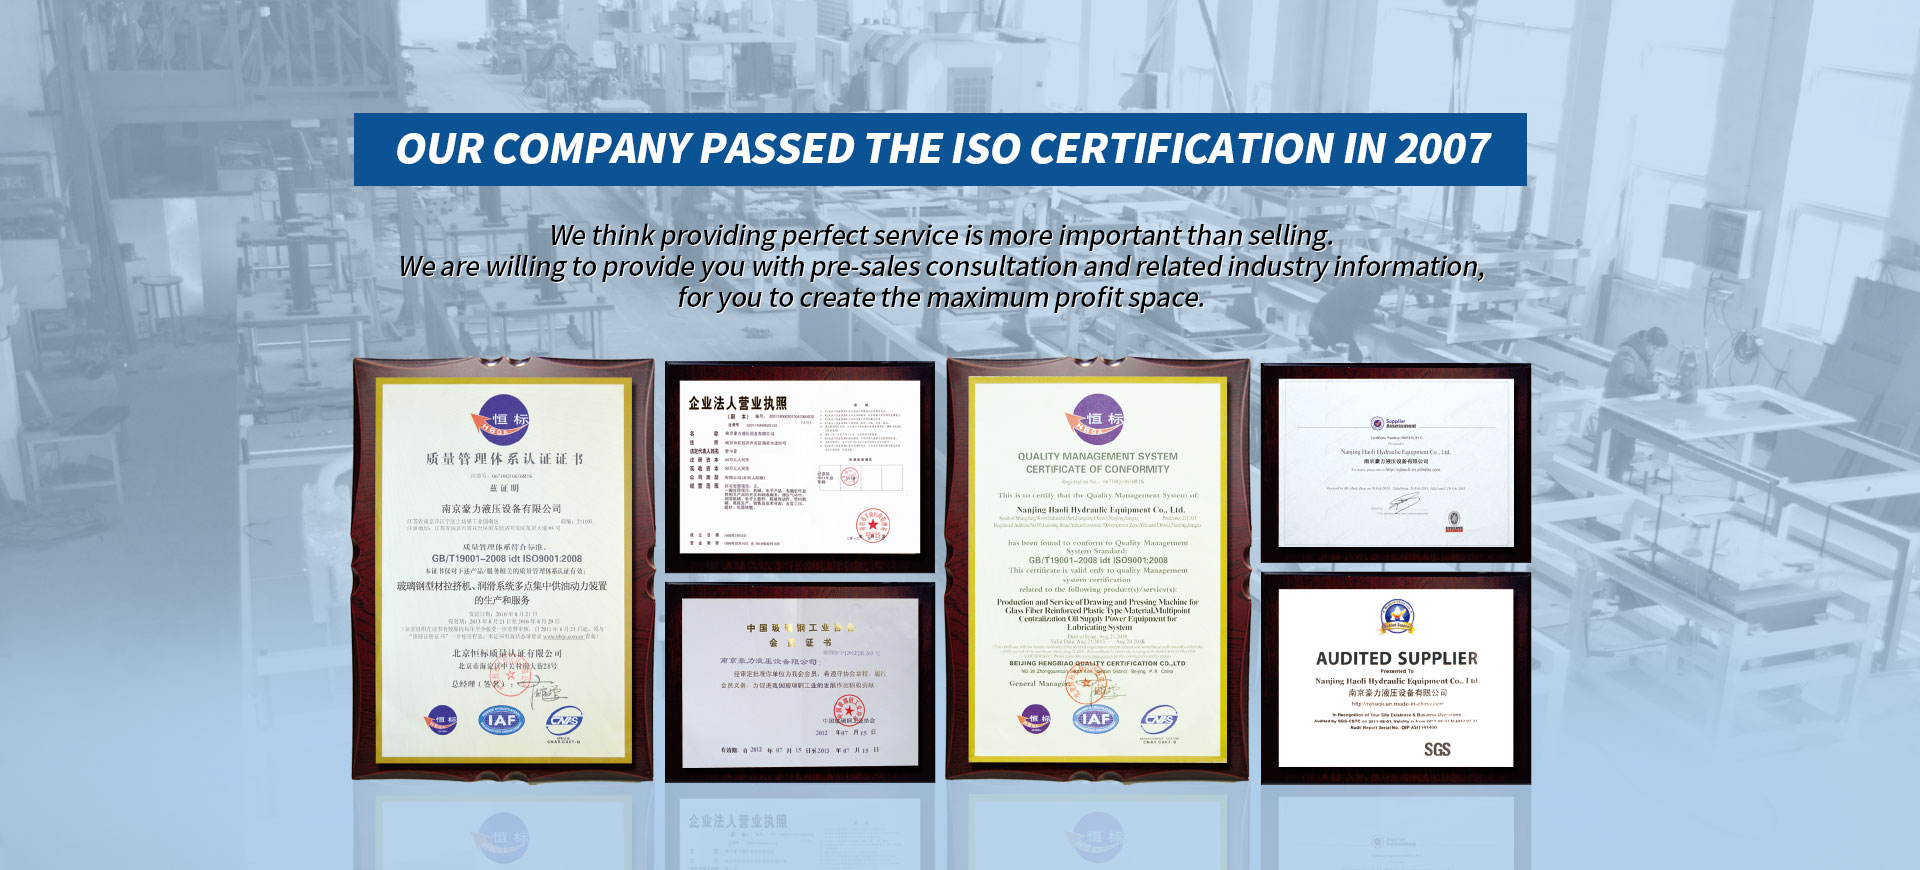 Our company passed the ISO certification in 2007